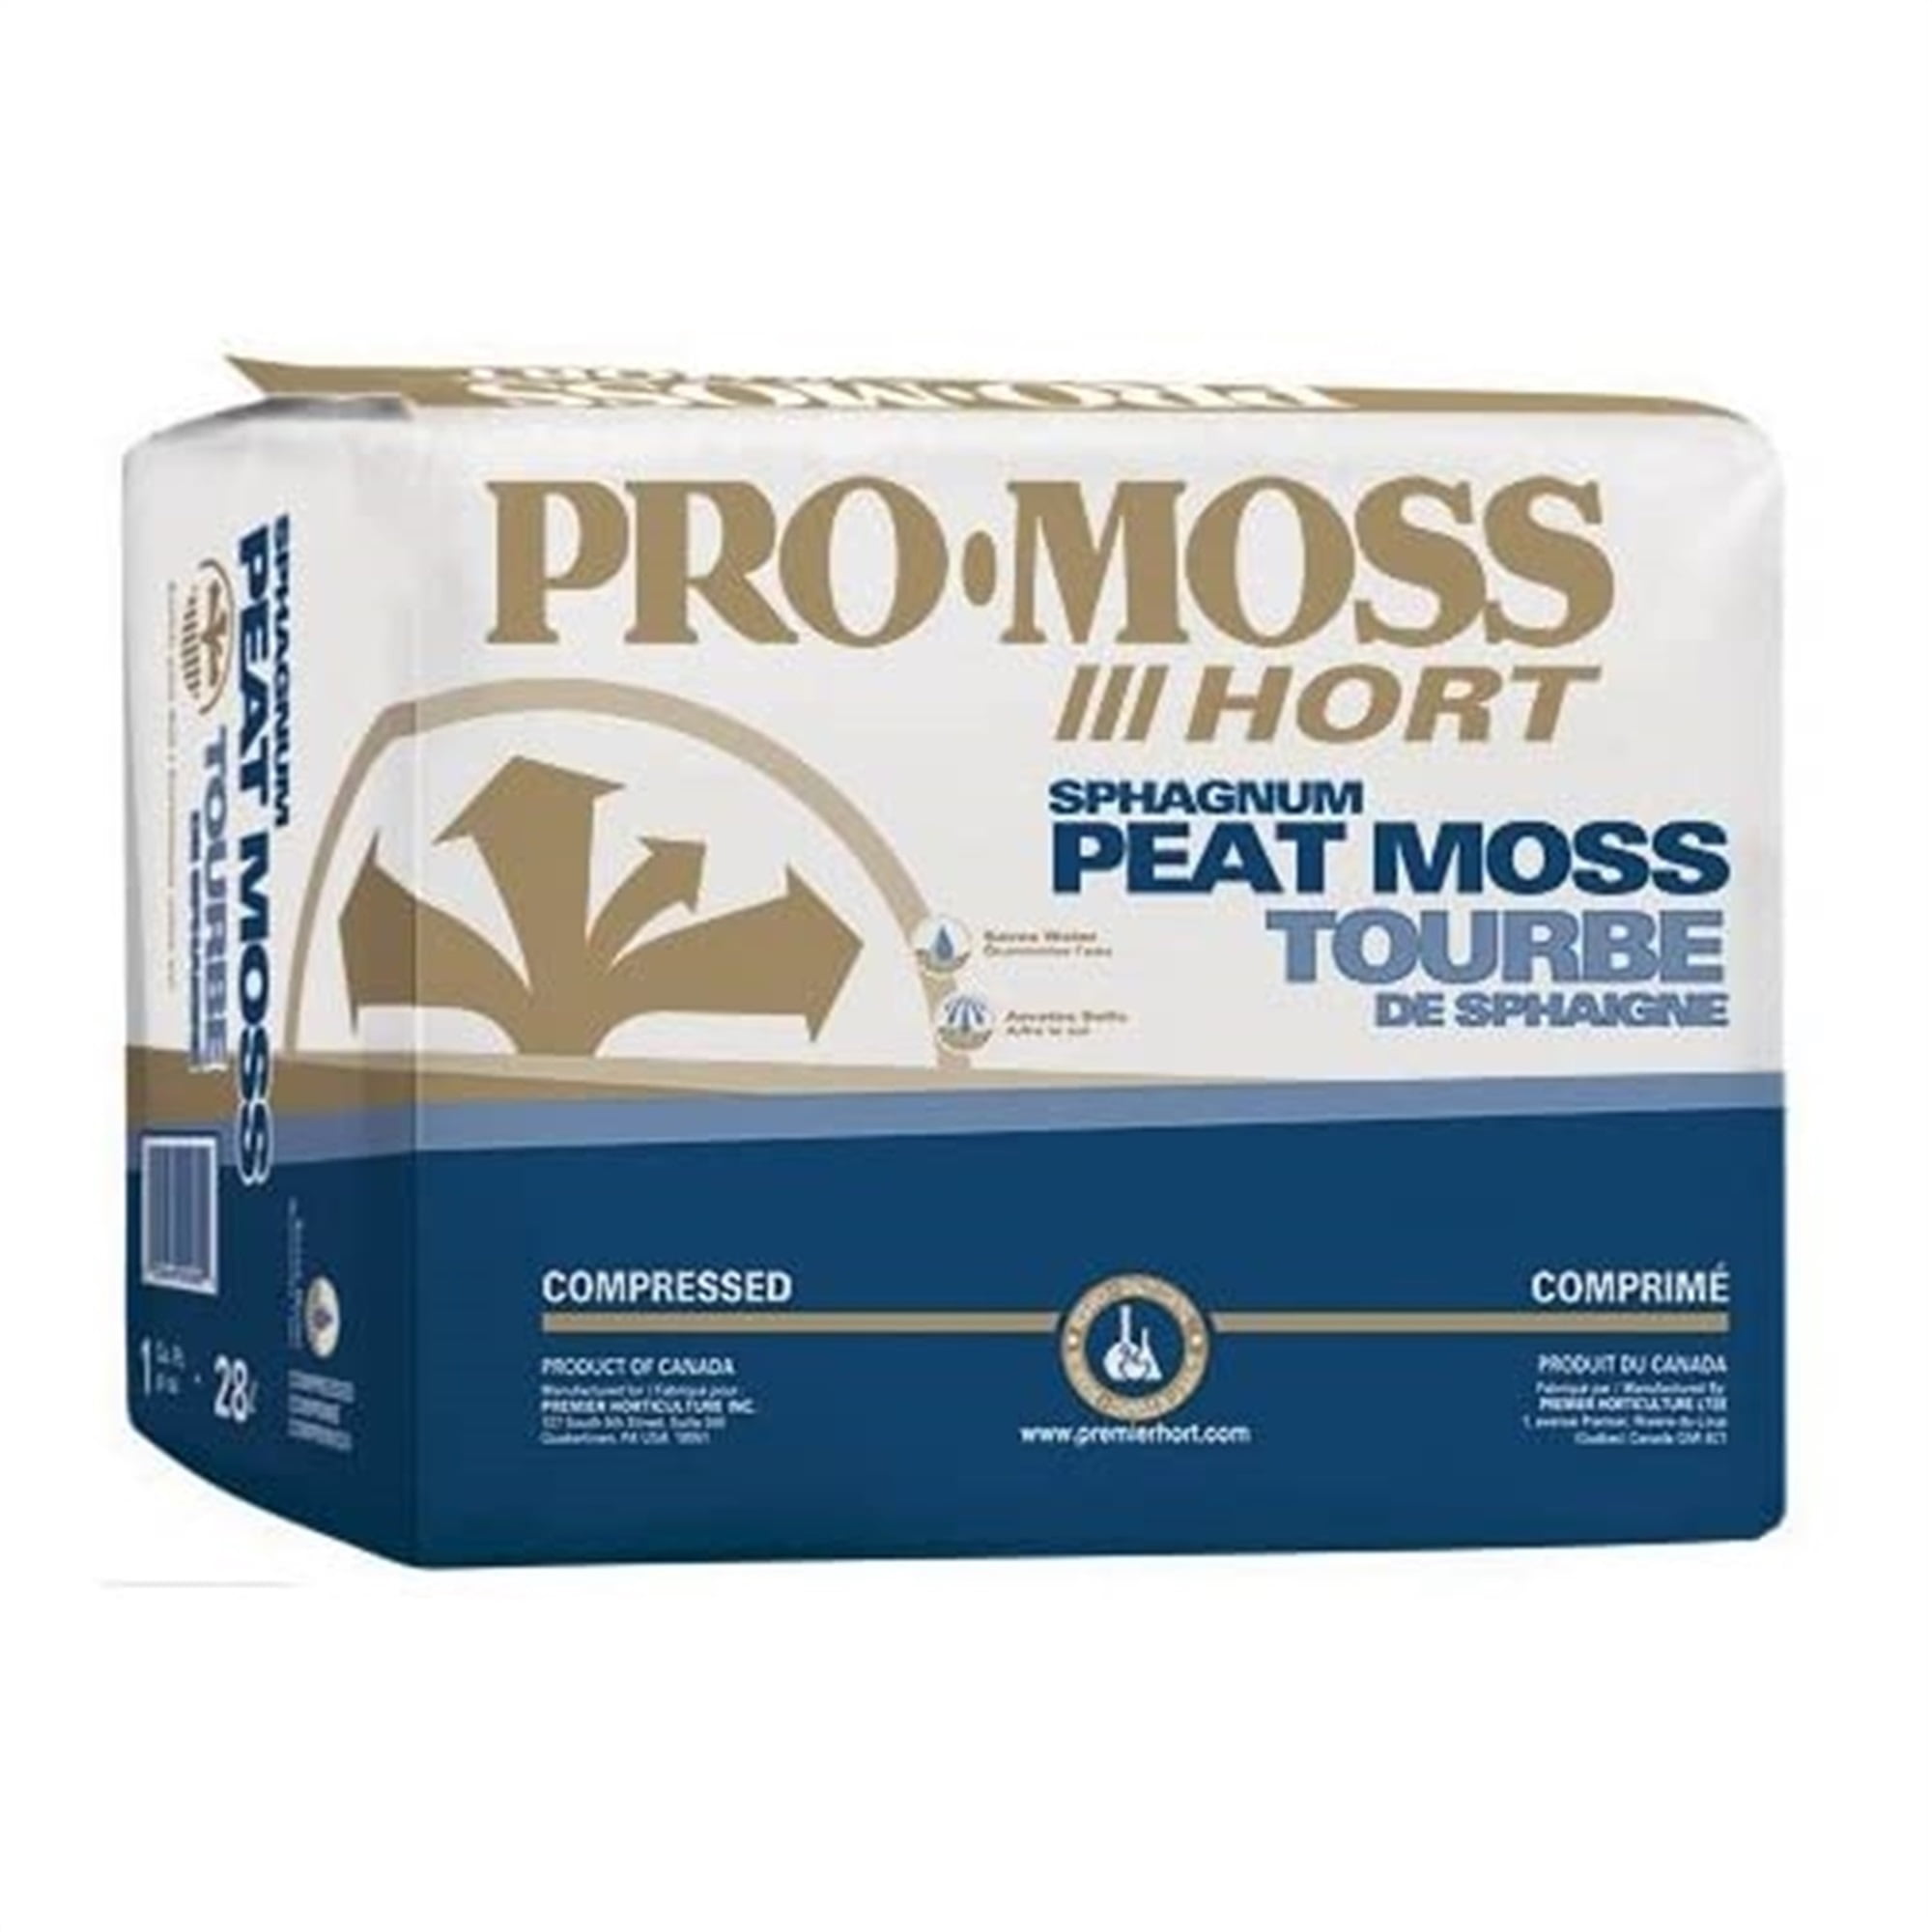 What Are the Pros and Cons of Peat Moss?